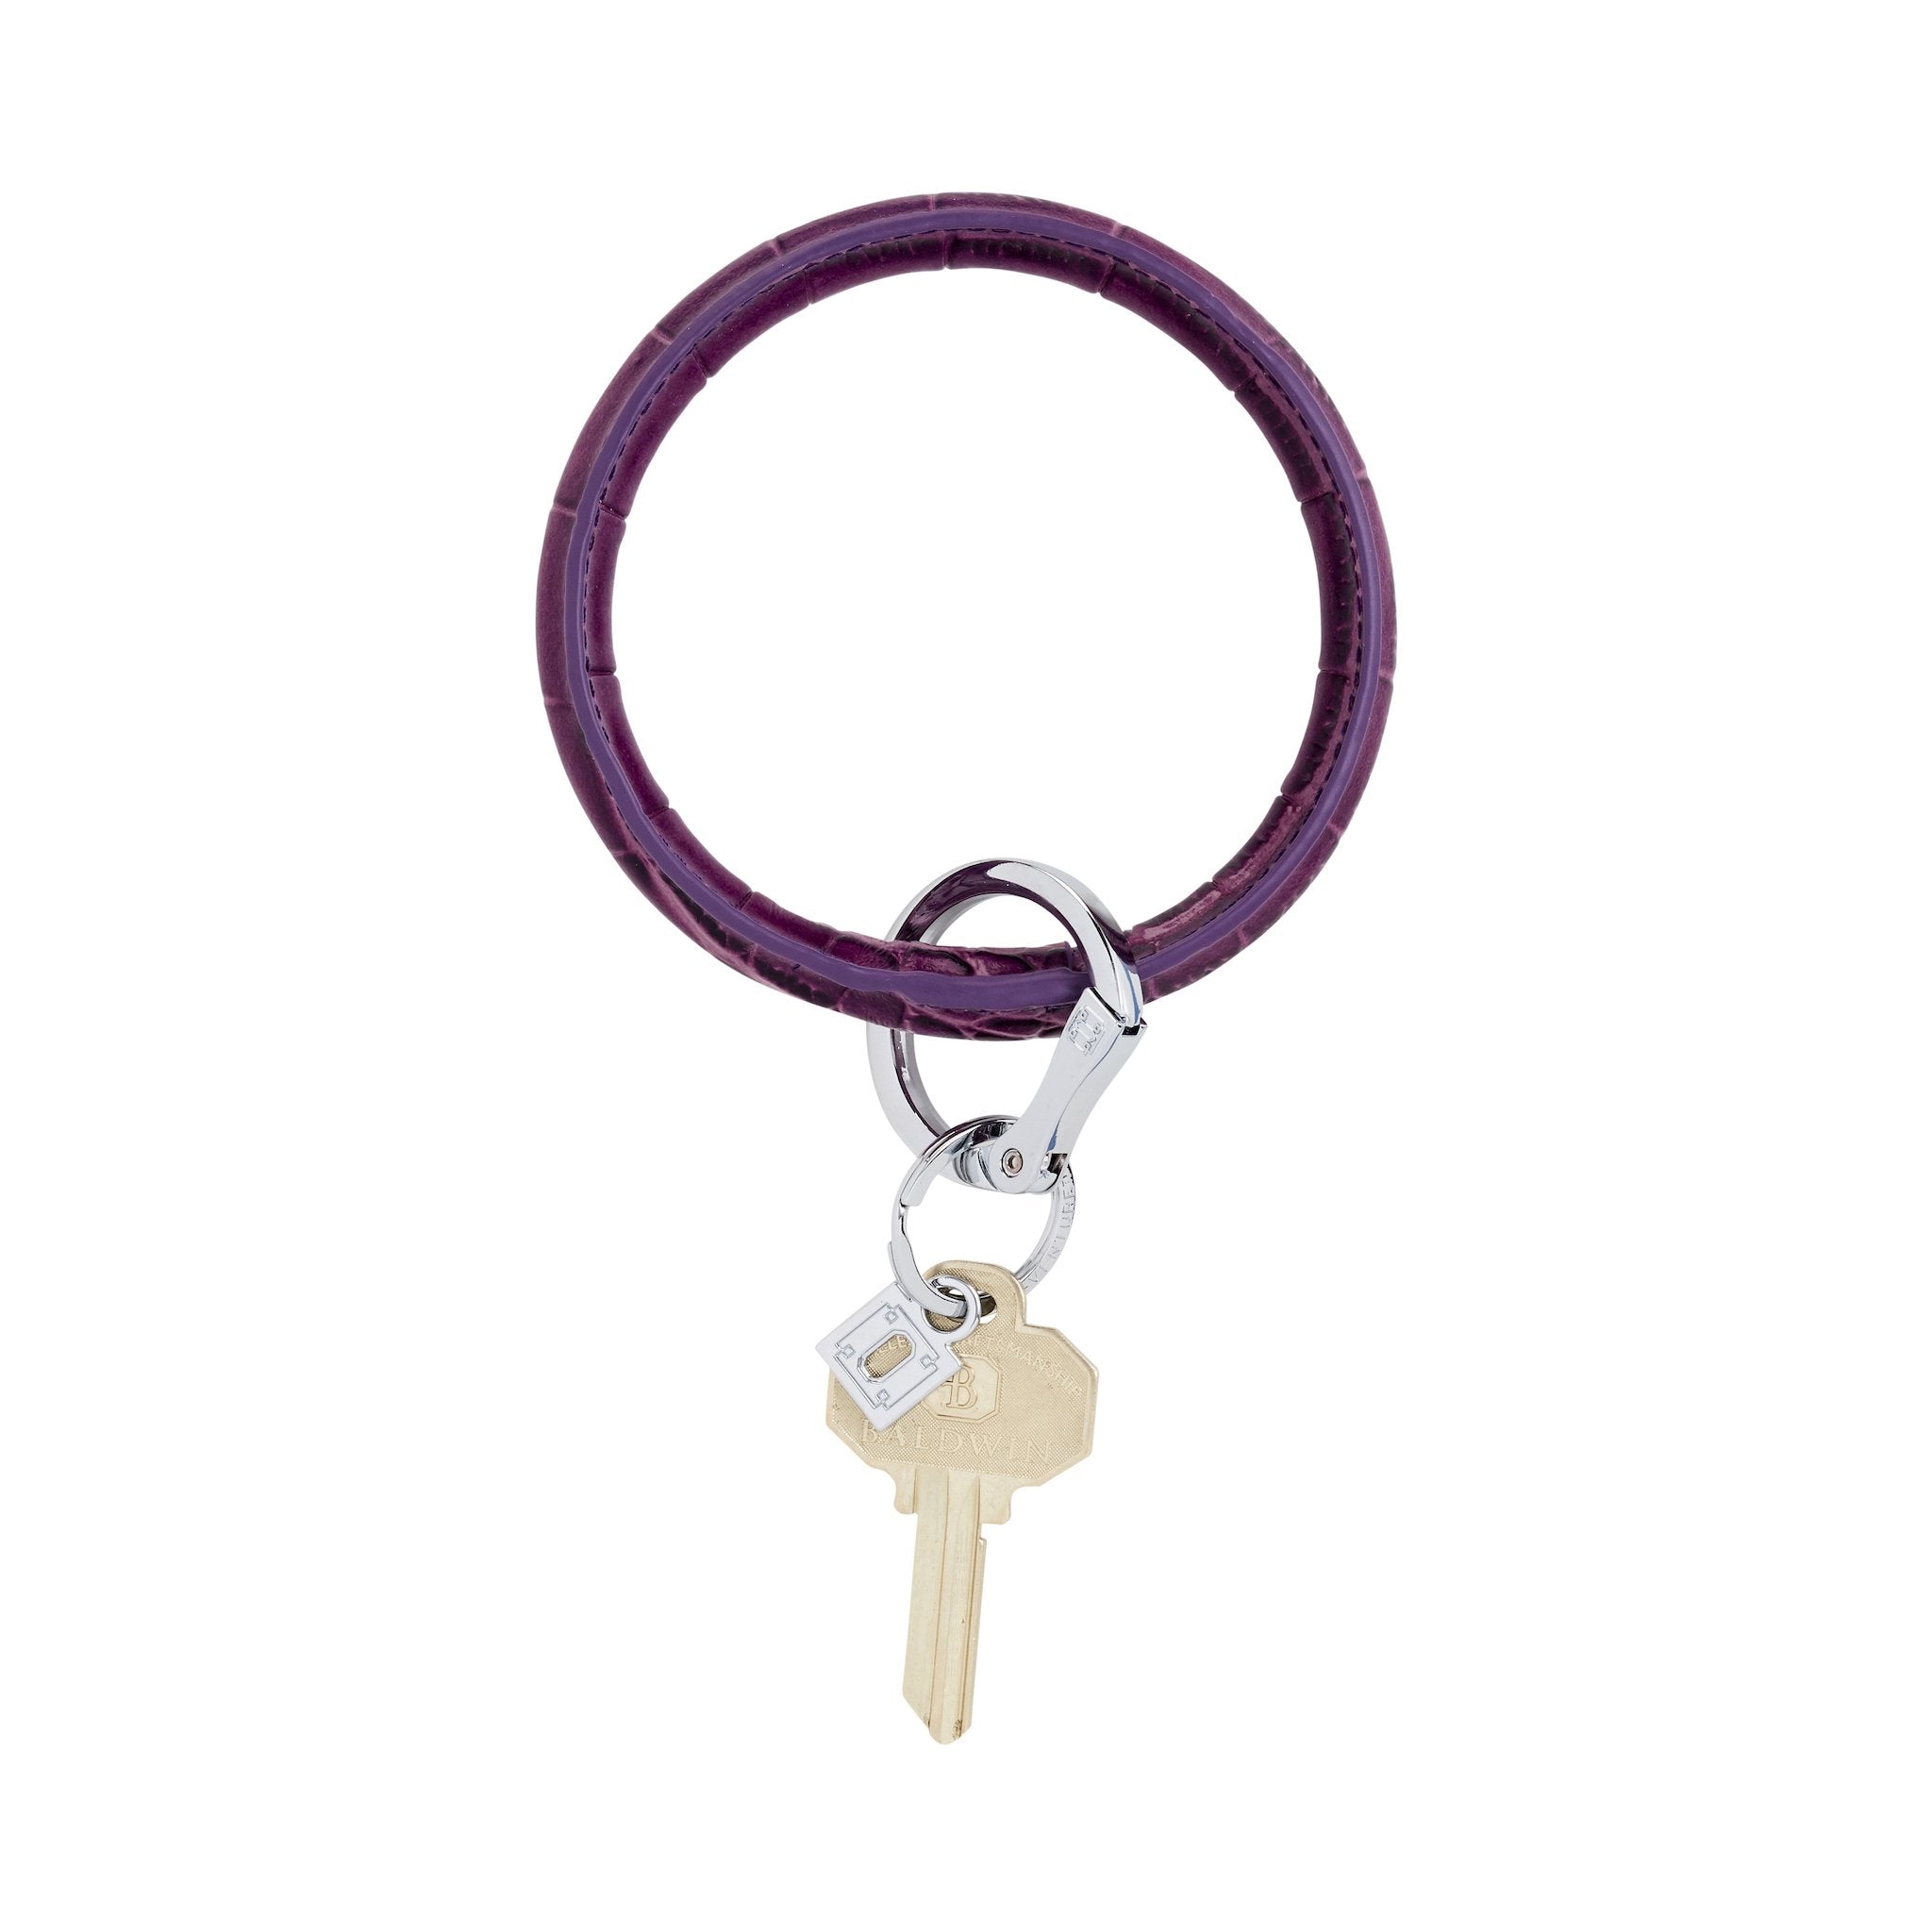 Oventure Big O Leather Key Ring - Cherry on Top Croc